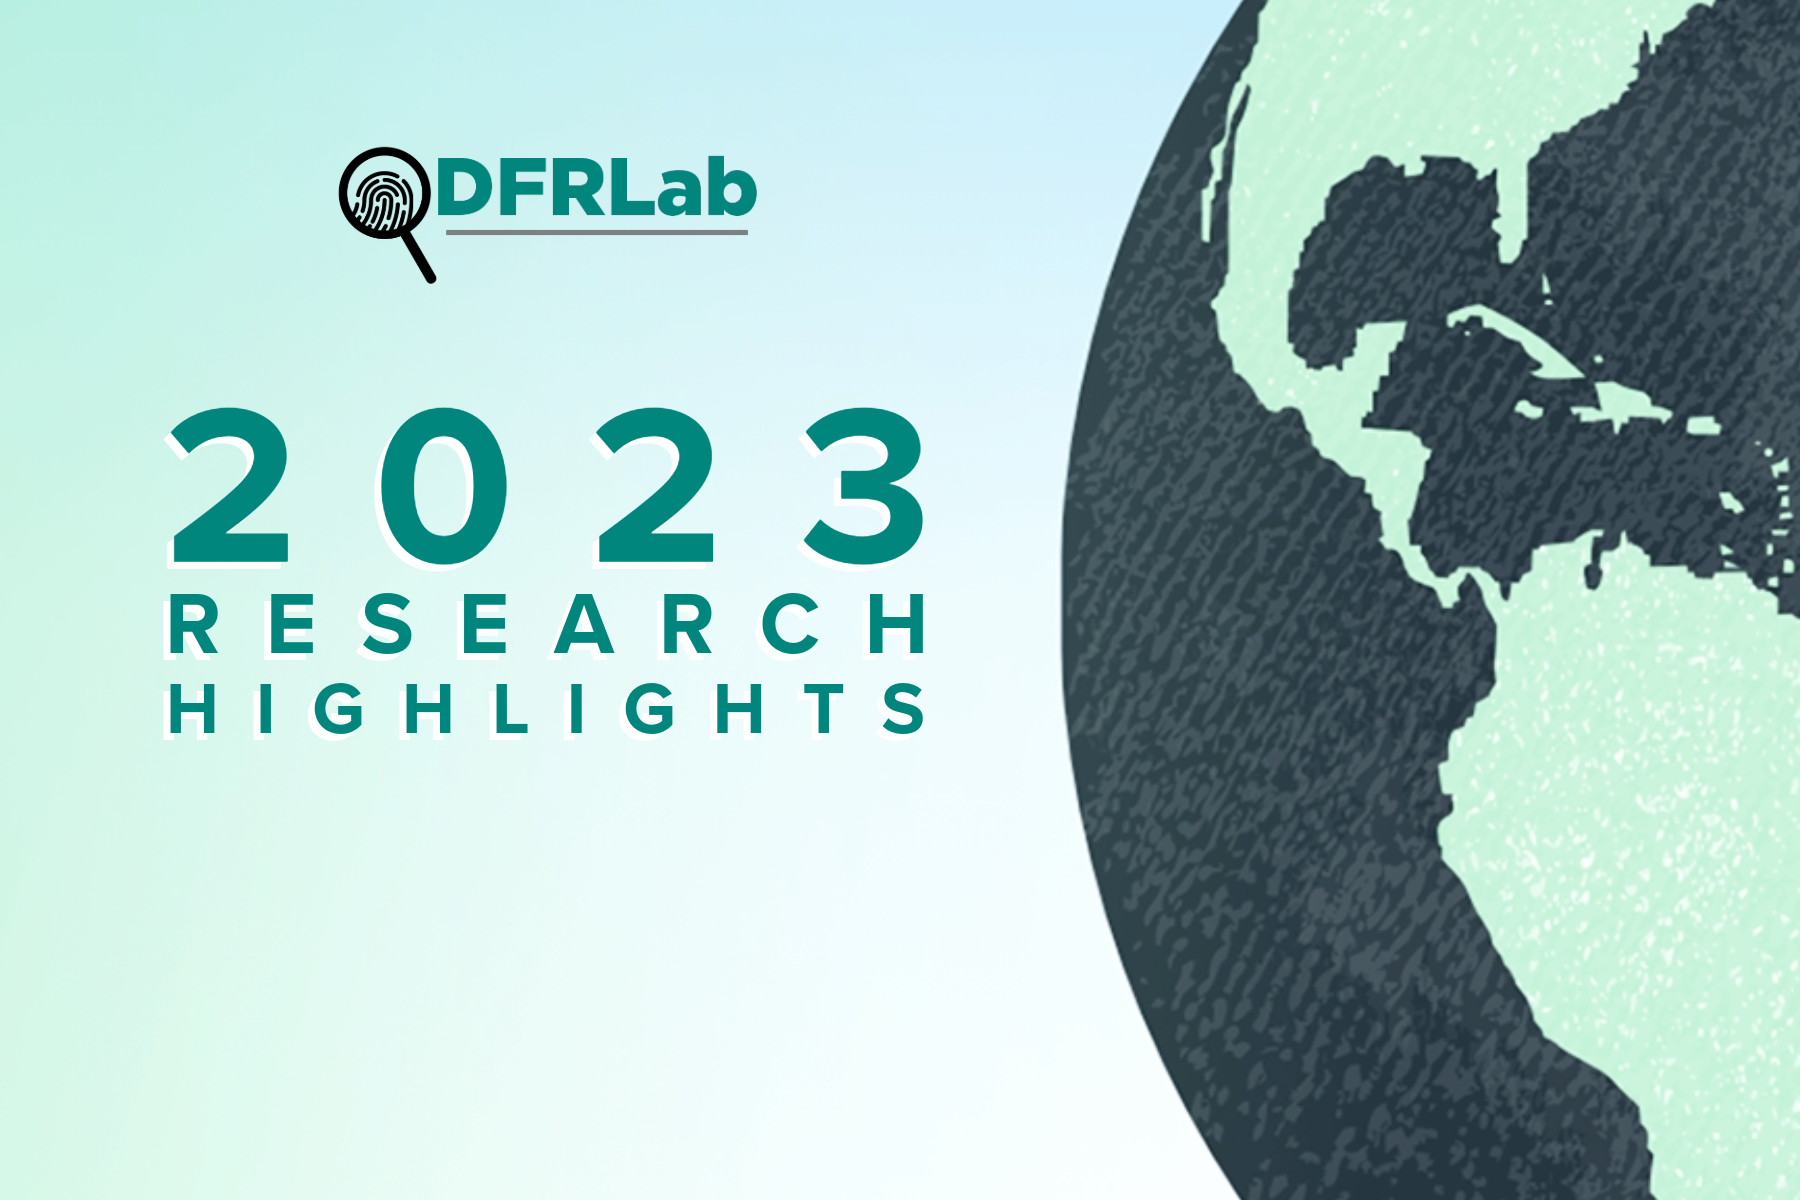 DFRLab research highlights from 2023